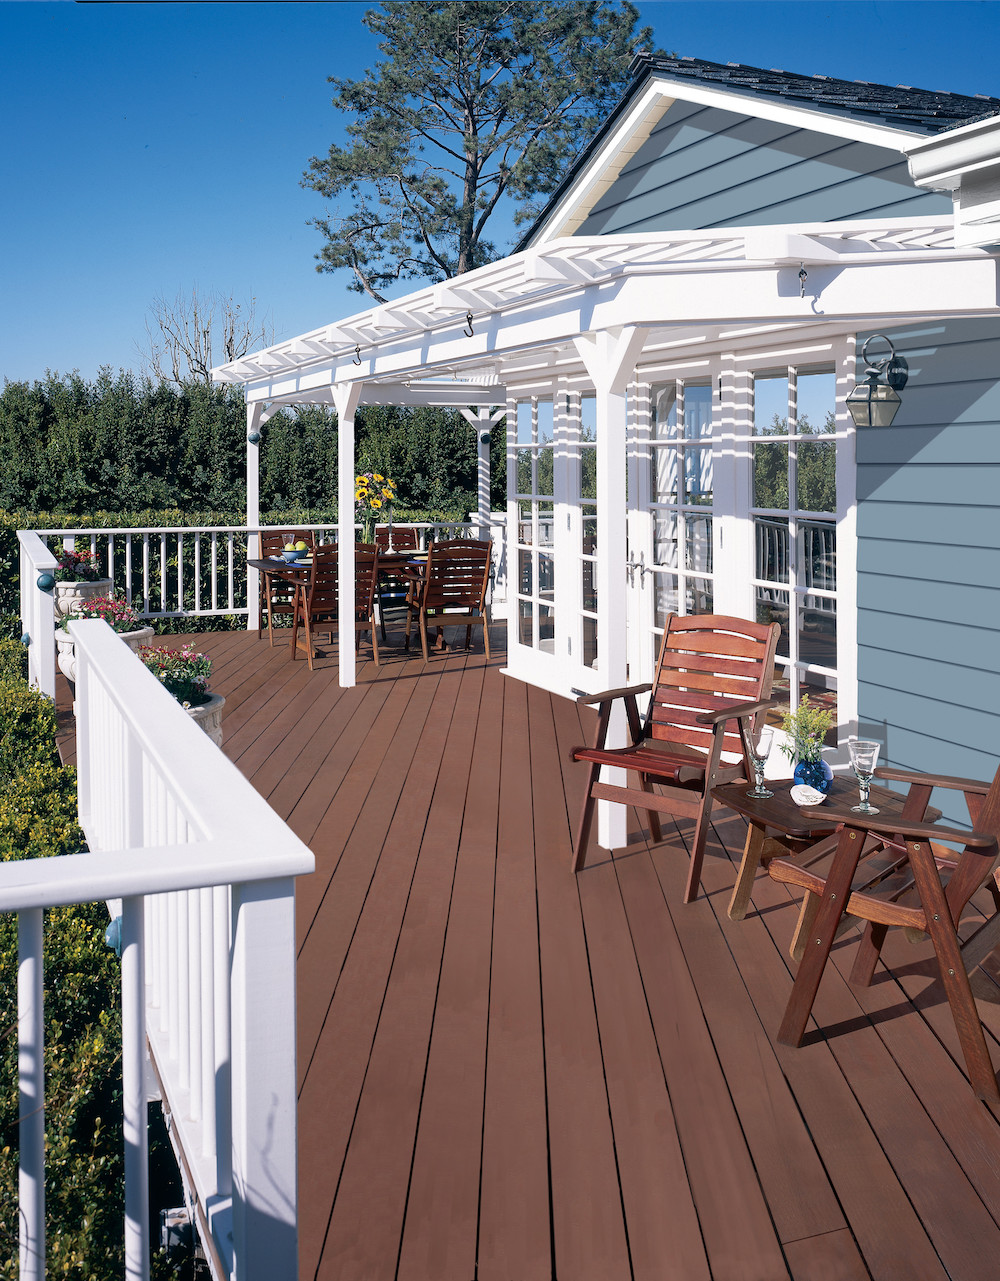 An exterior deck painted in at the back of a blue house painted in BEHR Rainy Season MQ5-27 with white trim and pergola painted in BEHR Ultra Pure White with two wooden tables surrounded by deck chairs